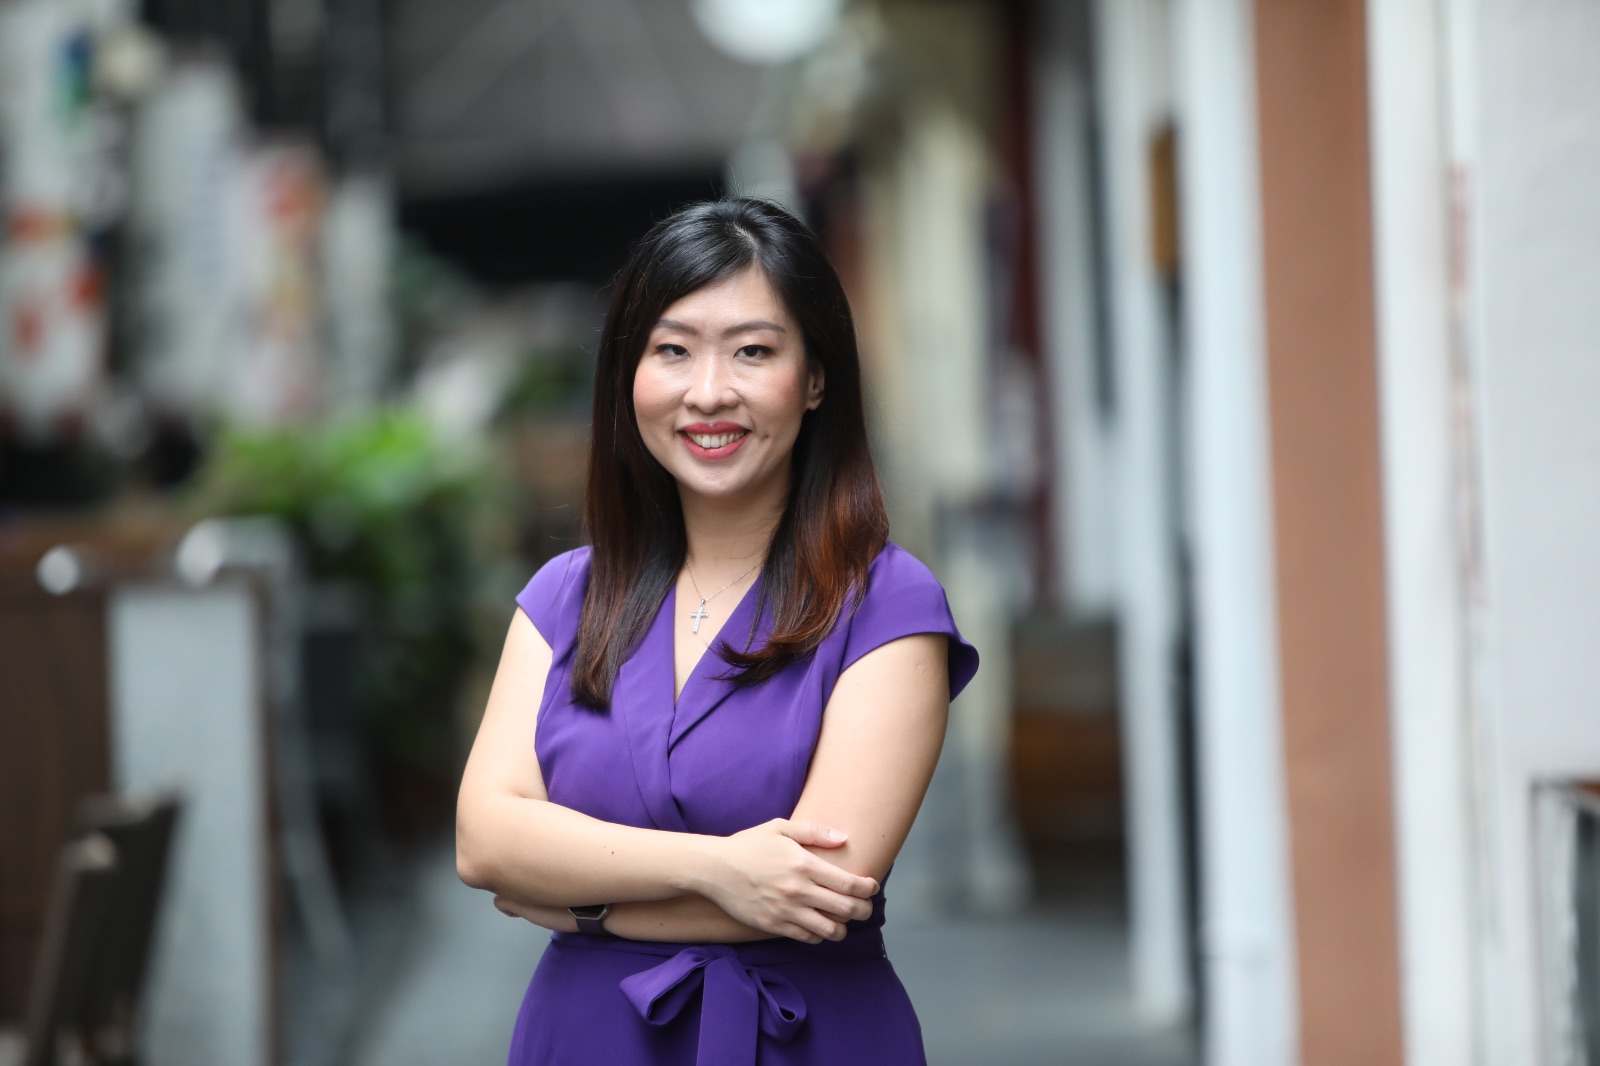 , How to combat loneliness when you are single, according to Lunch Actually CEO Violet Lim